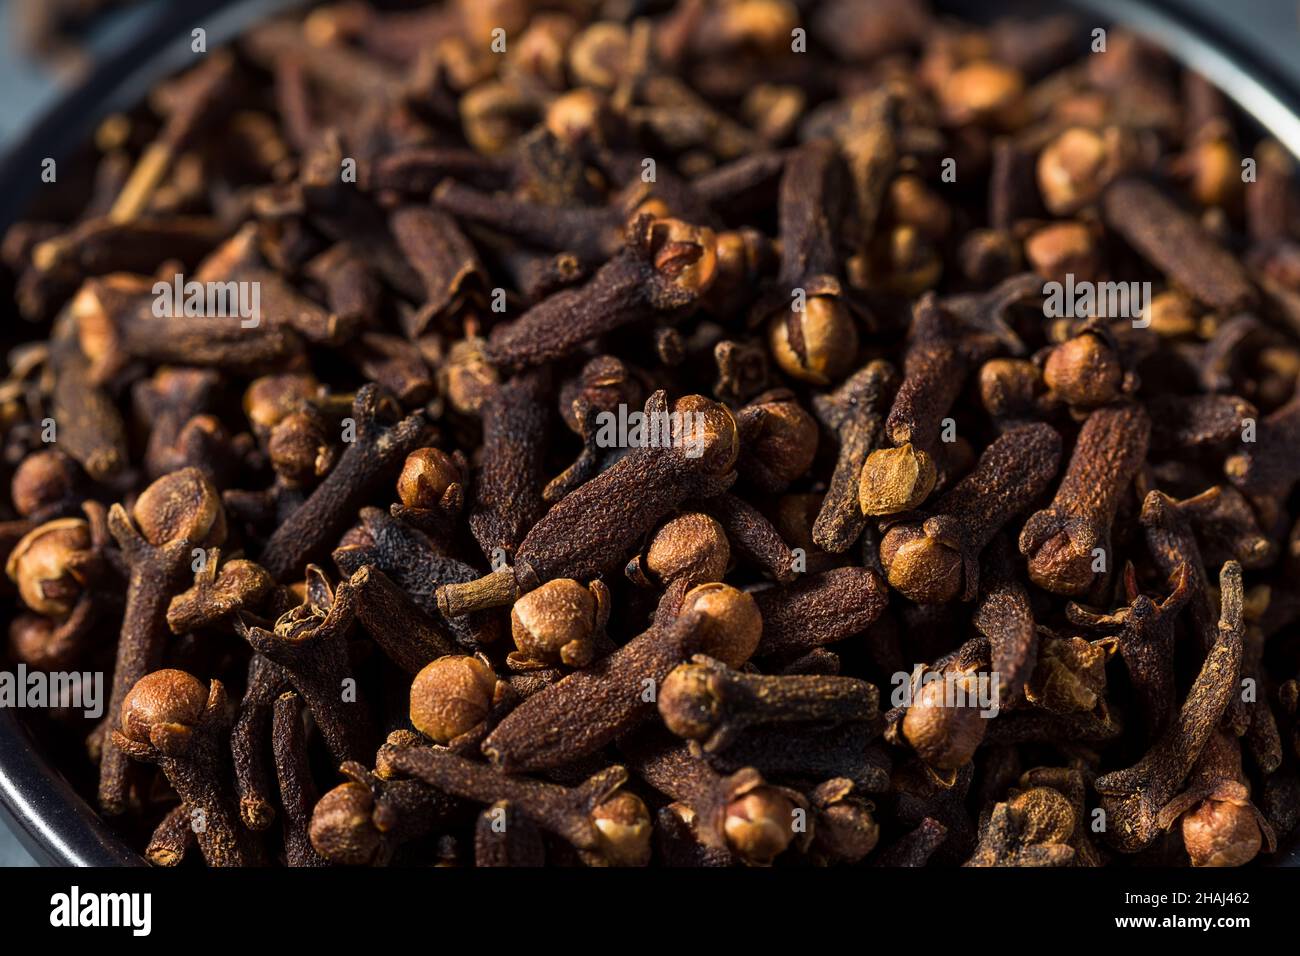 Dry Organic Whole Cloves in a Bowl Stock Photo